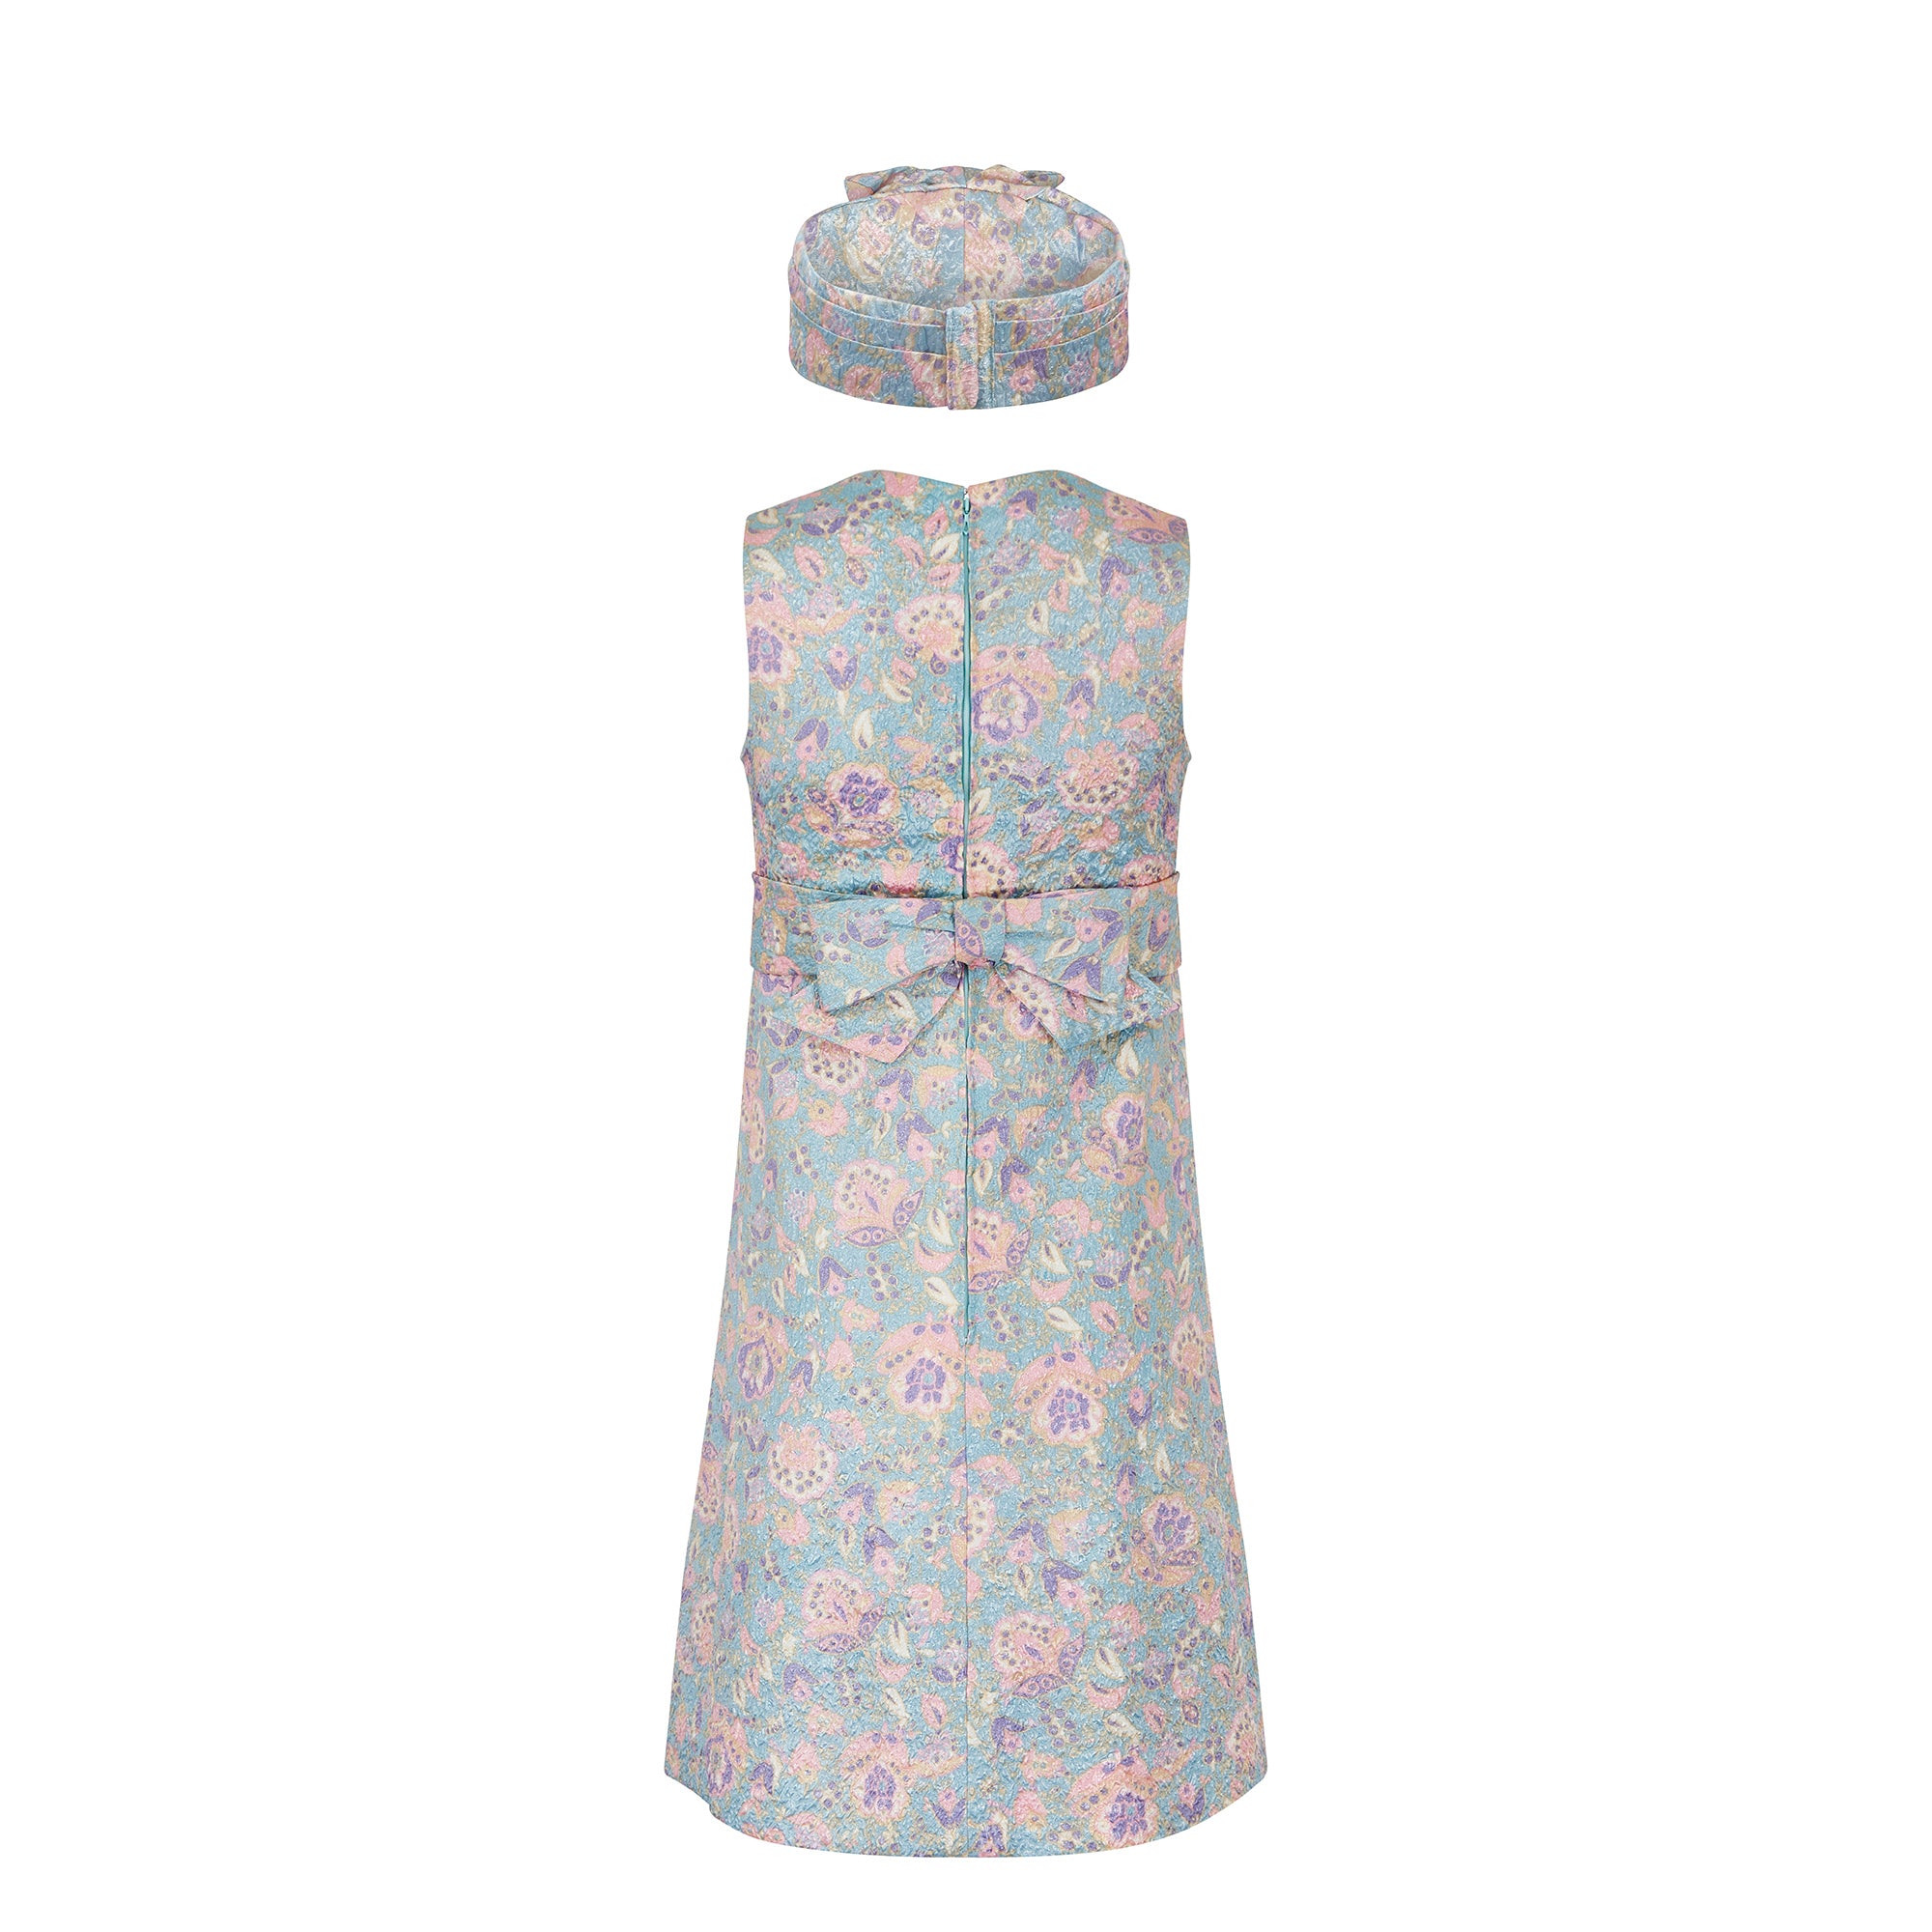 1960s Pastel Floral Lame Dress with Matching Headband